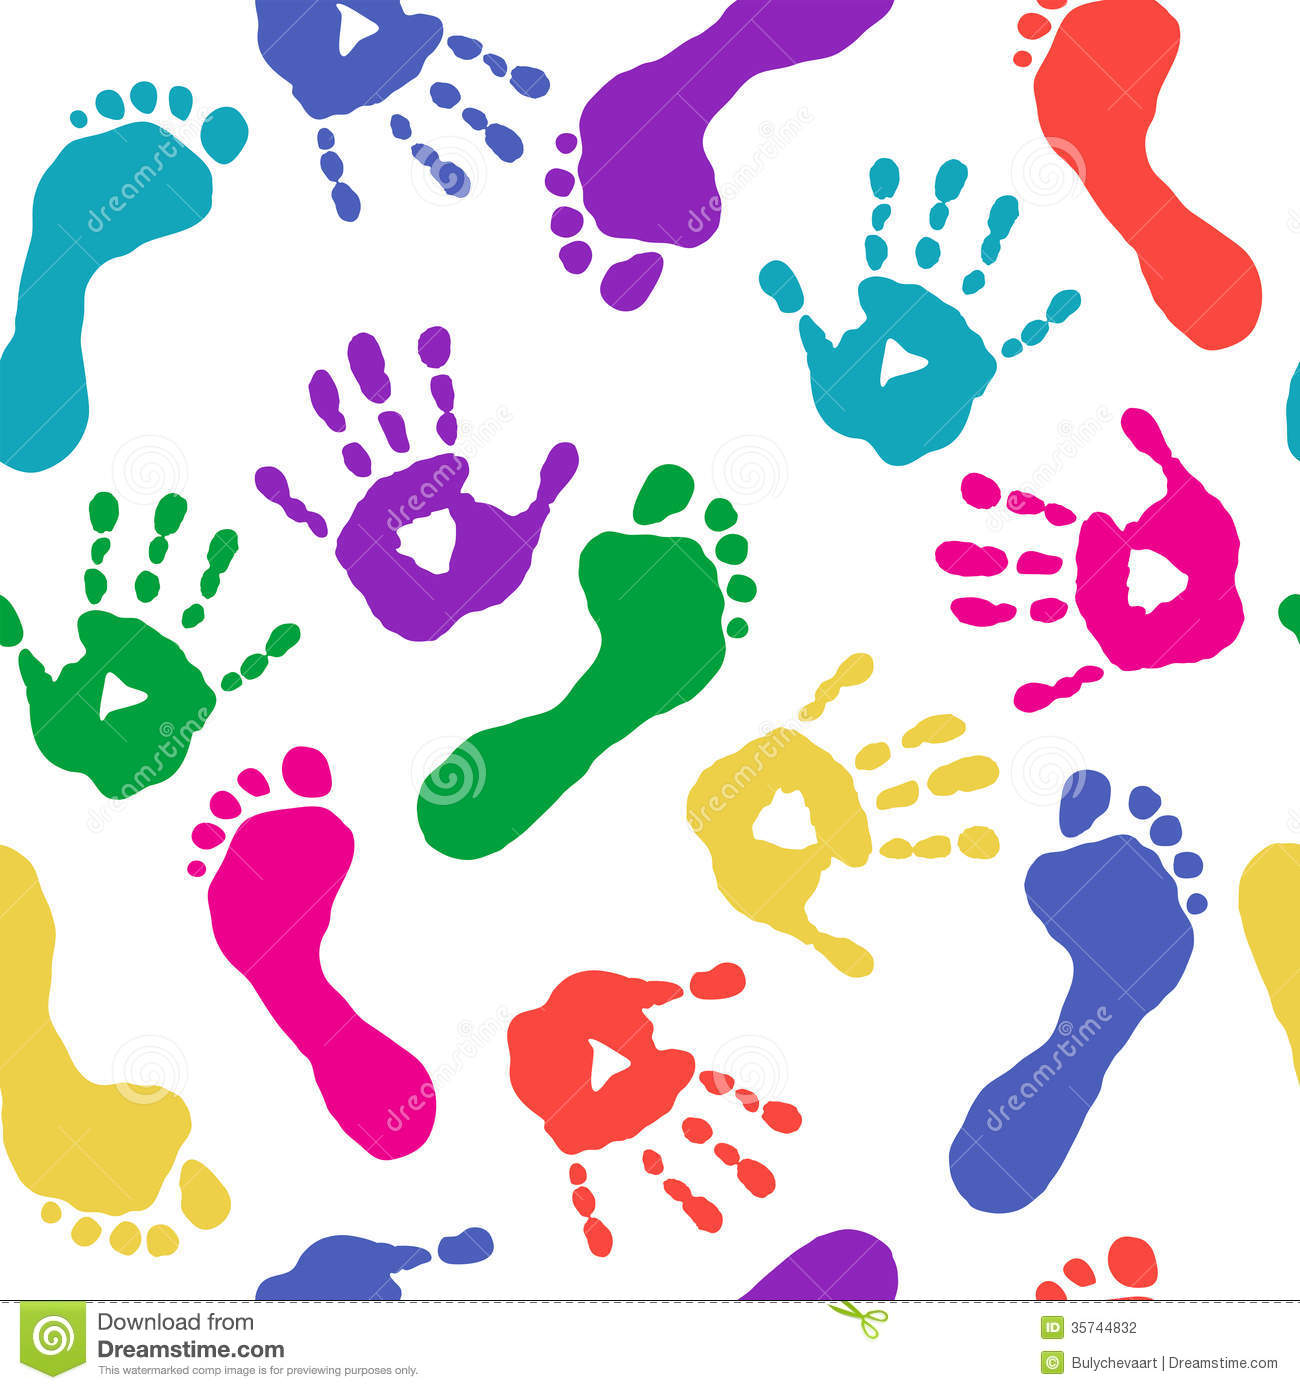 Paints Prints Of Hands And Feet Stock Photography   Image  35744832